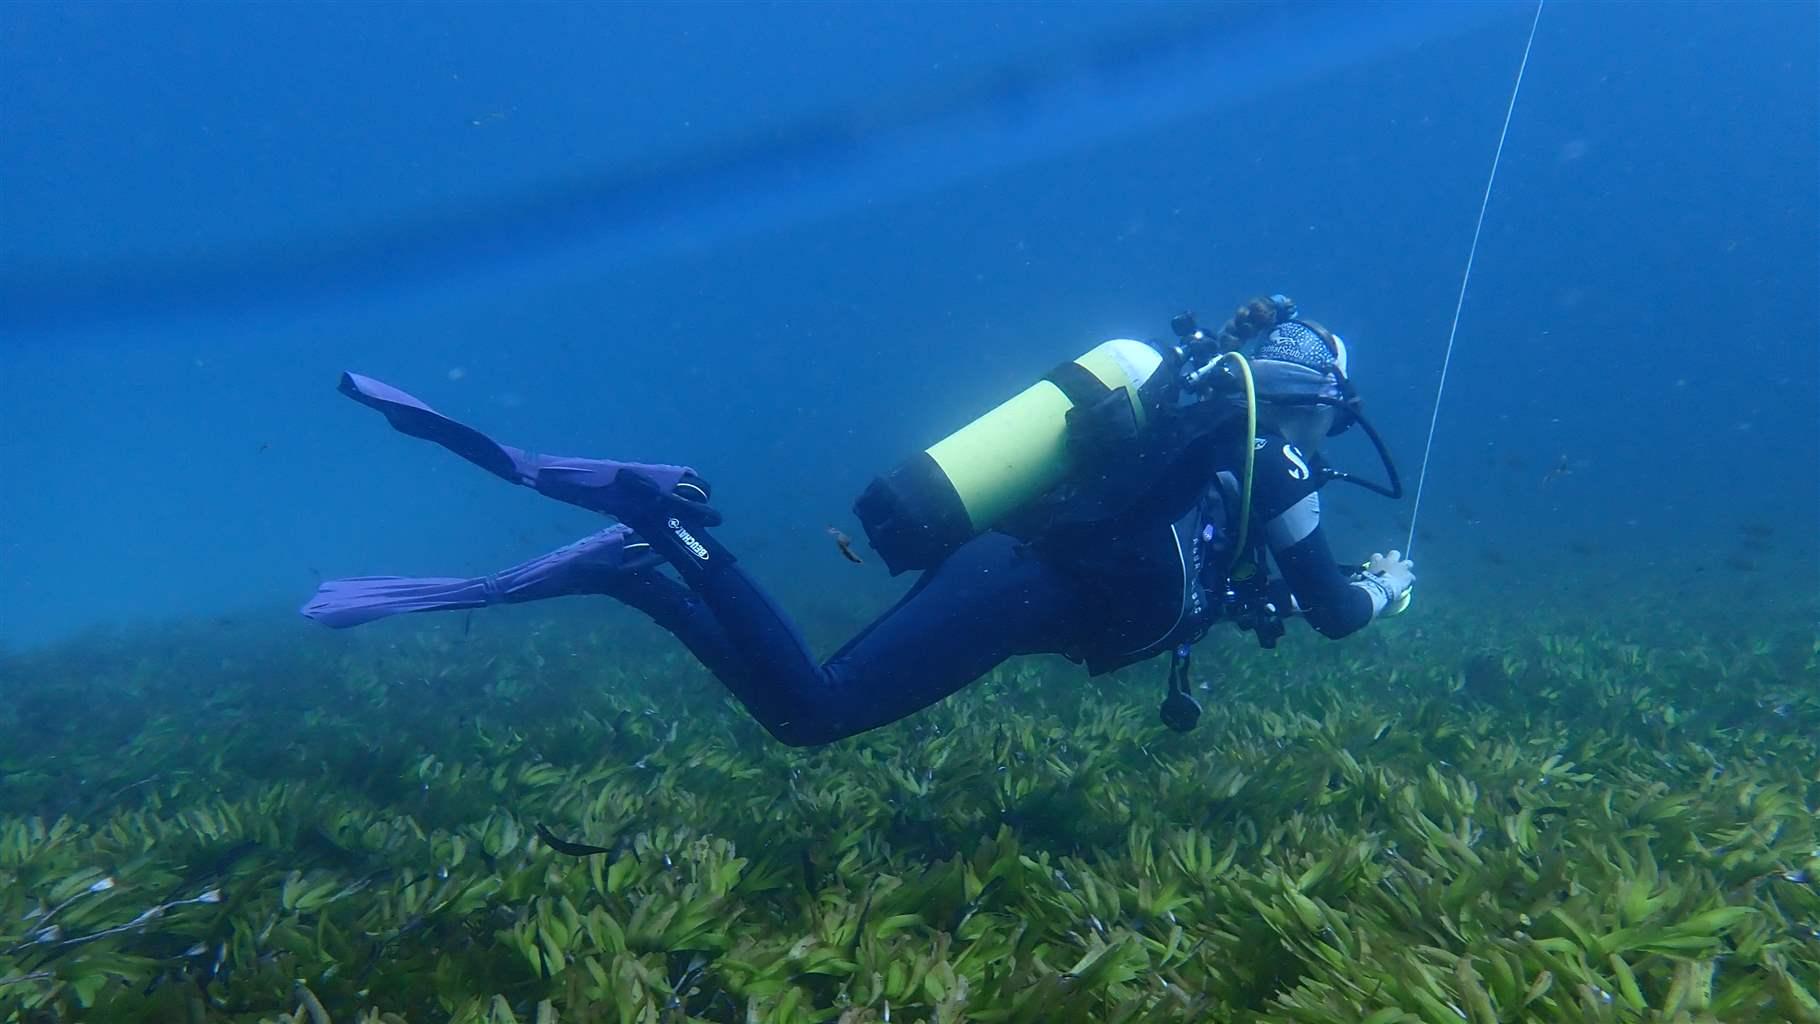 A scuba diver wearing a black full-body wetsuit and a pale-yellow air tank glides through fairly clear, shallow waters above an expansive bed of seagrasses. The diver is holding a thin line that extends toward the surface, and silhouettes of some small fish are visible in the background.